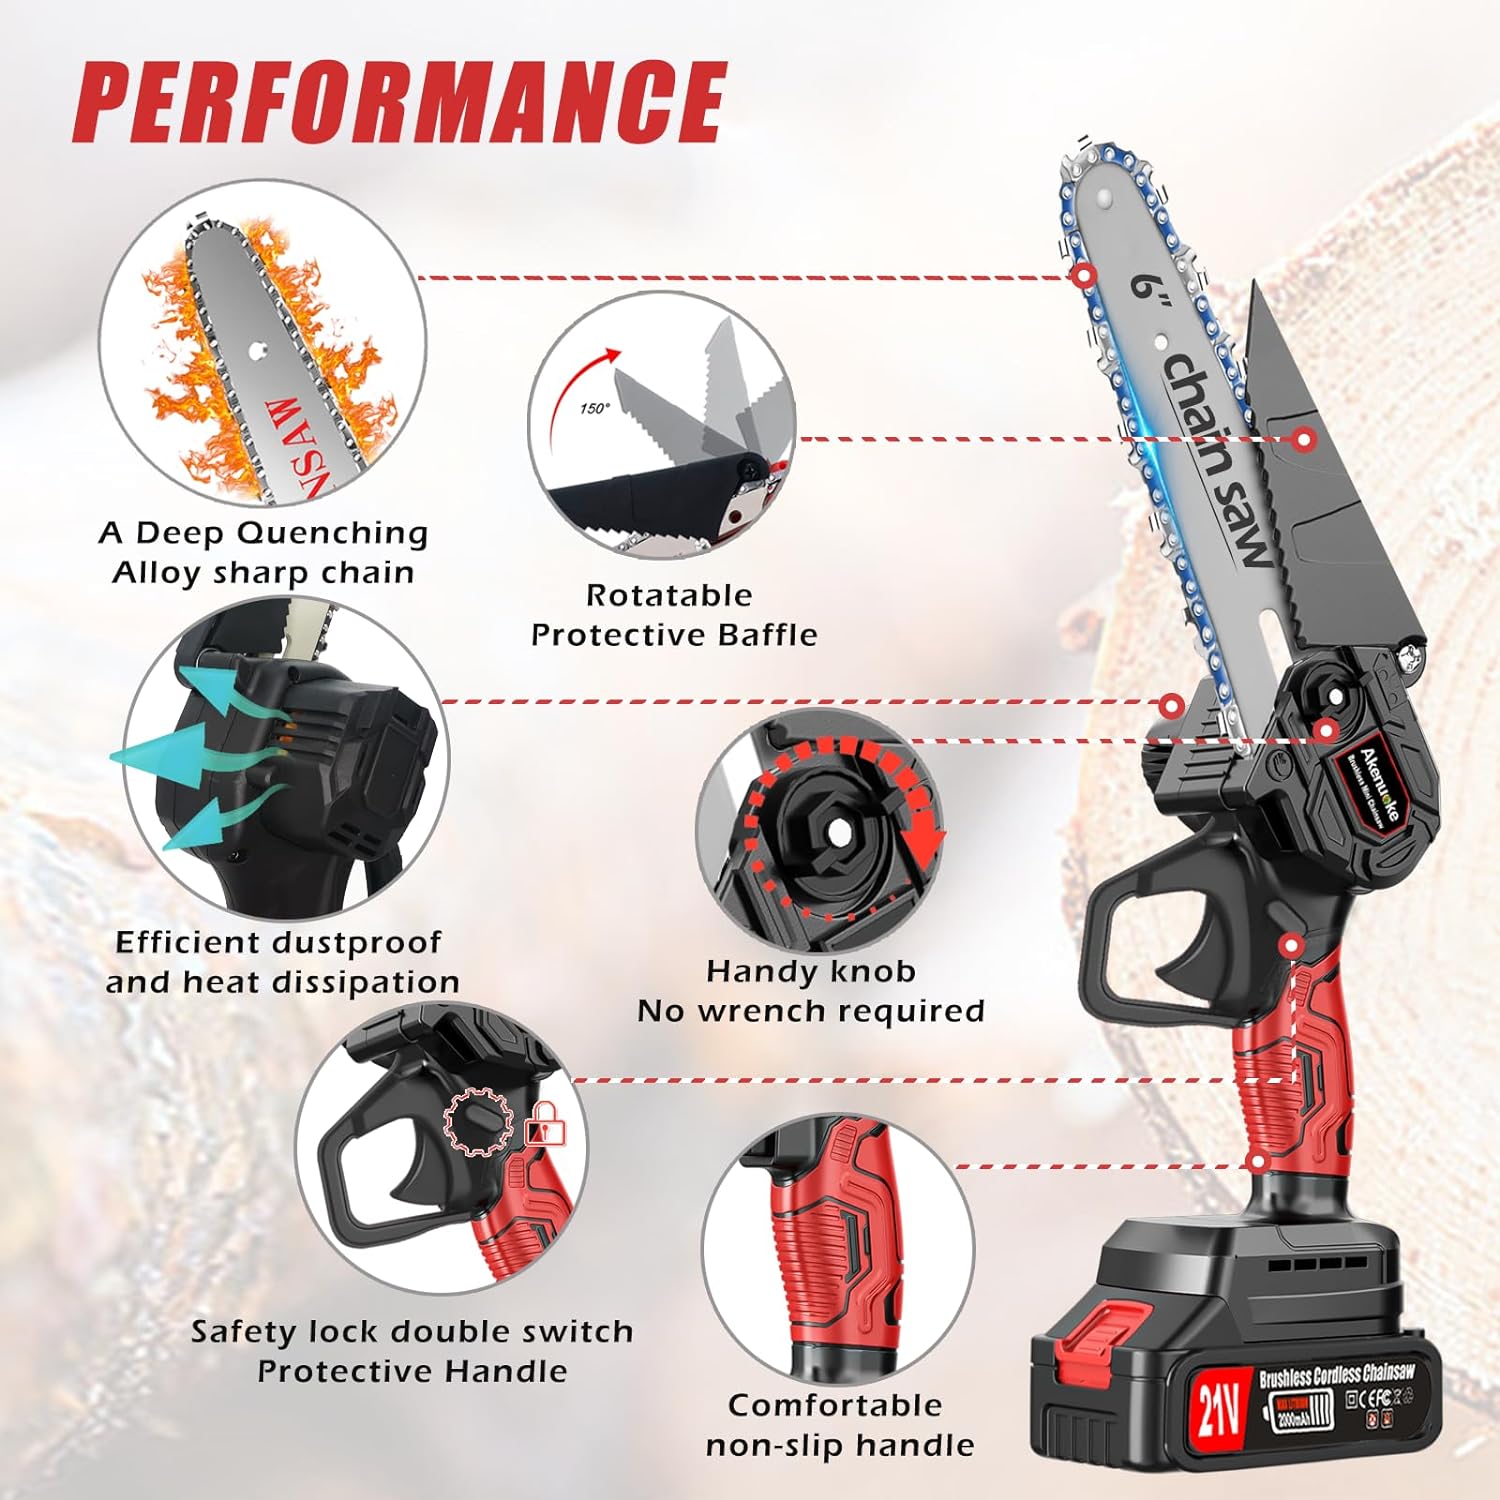 Mini Chainsaw Cordless 6 Inch Battery Powered, Electric Mini Chain saw with 2 Batteries & 2 Chains, Portable Handheld Chainsaw for Tree pruning & Wood Cutting, Small Rechargeable Power Chain Saws